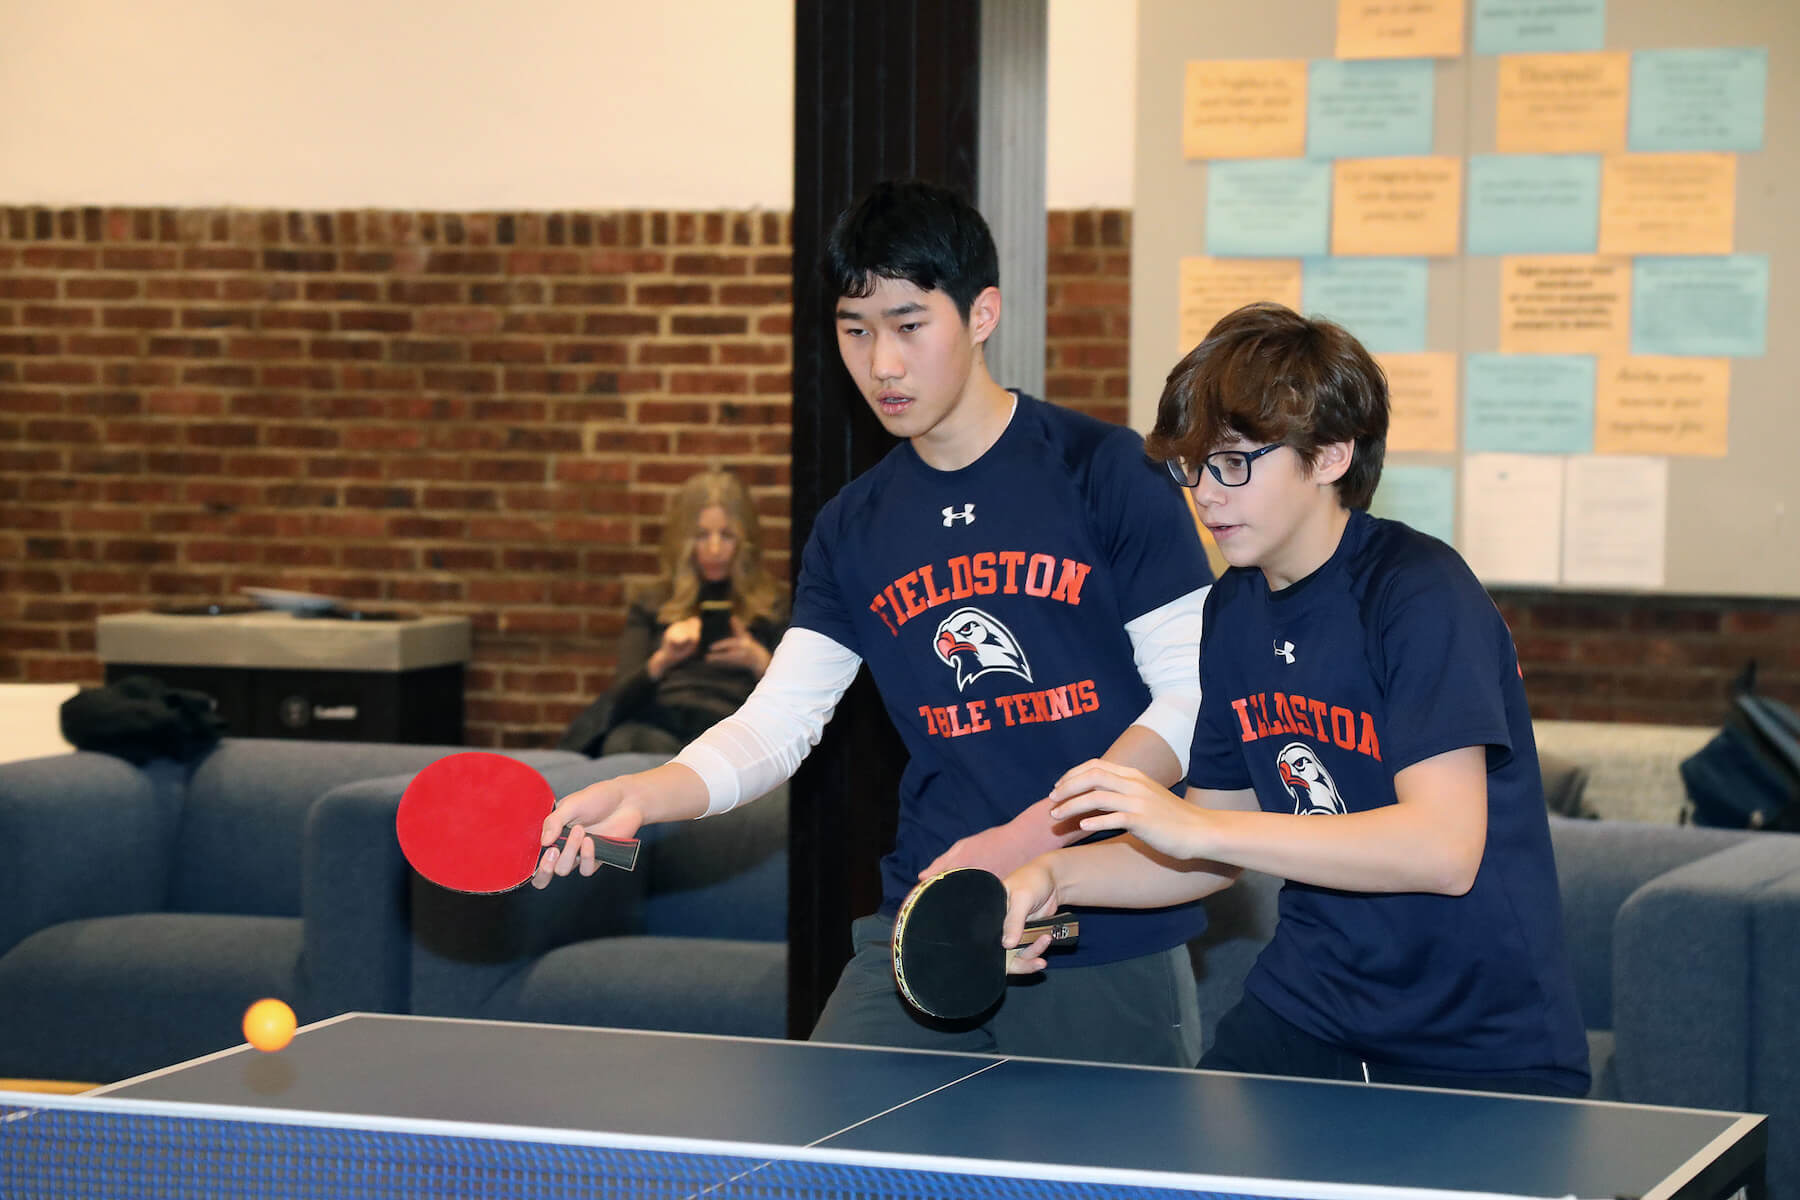 Ethical Culture Fieldston School Ping Pong Team members enjoy a game together